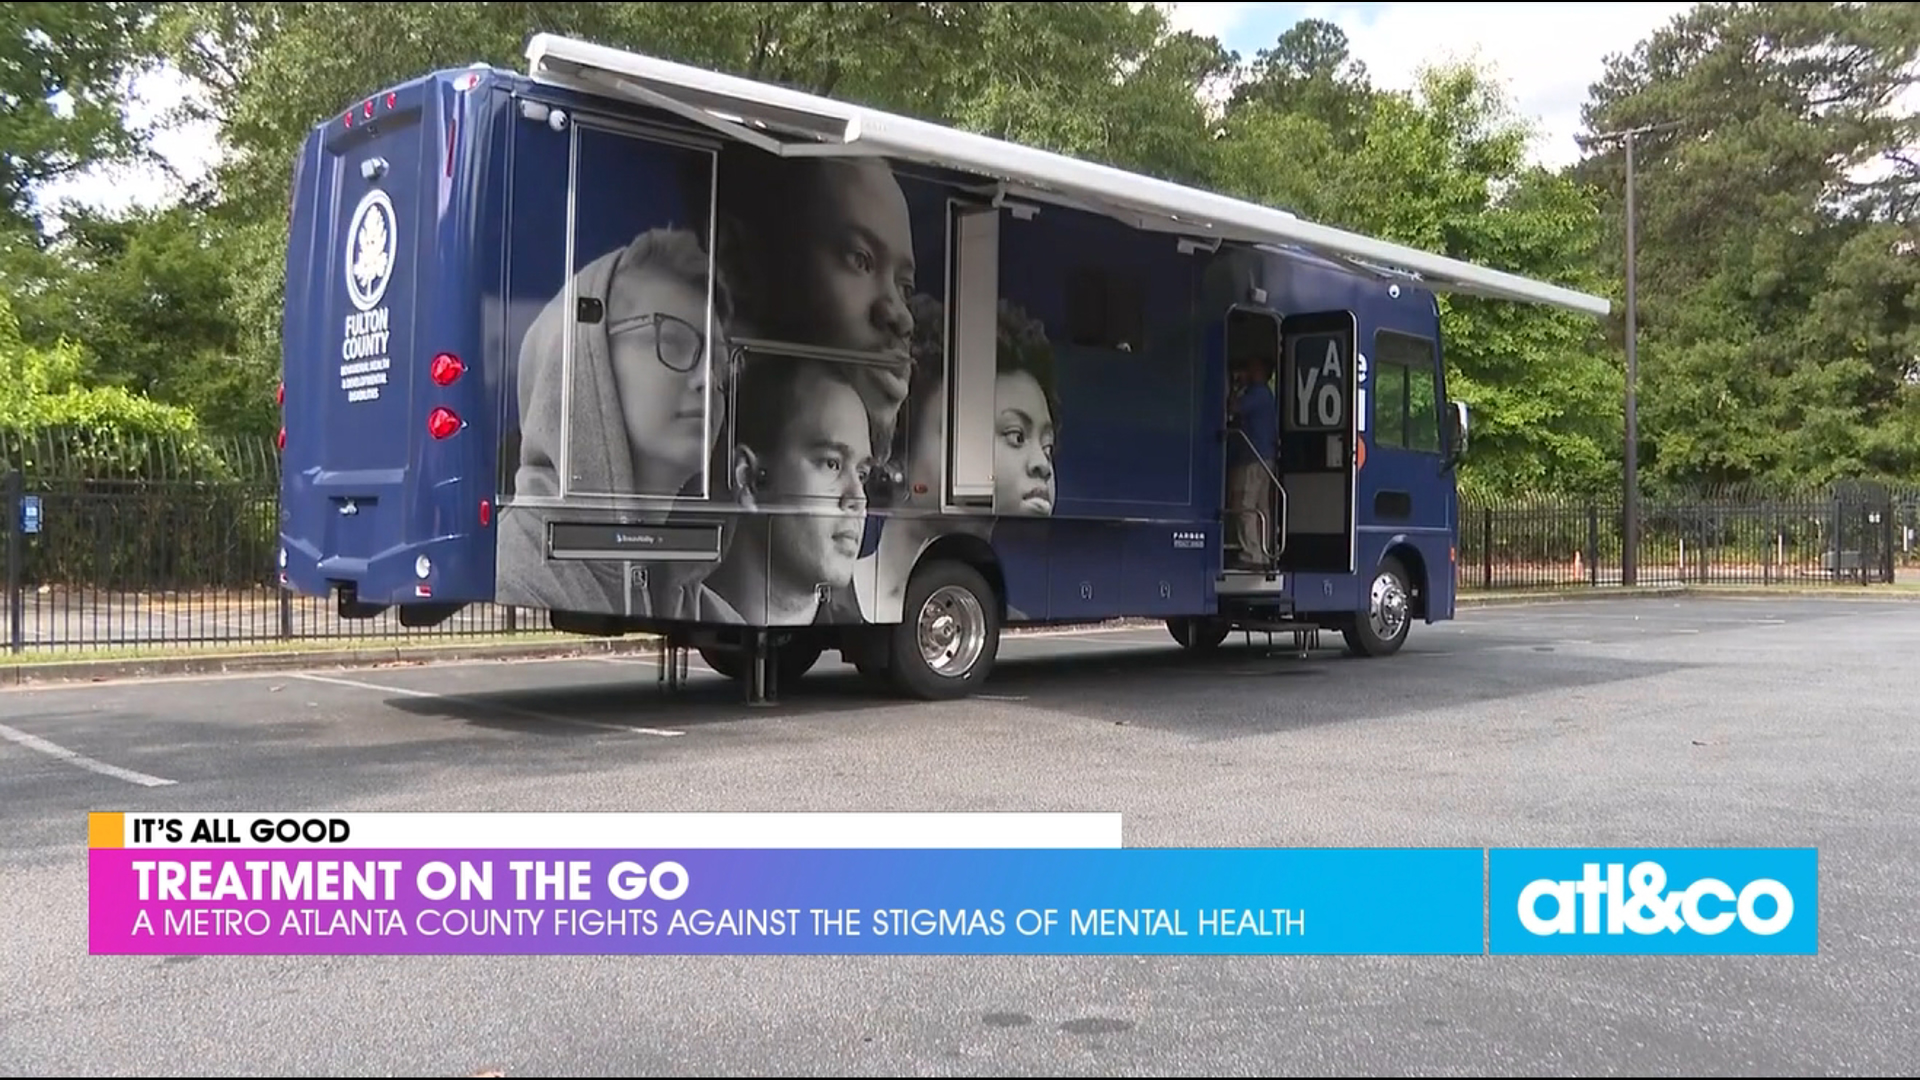 See how Fulton County is educating residents about mental health treatments with their new mobile unit.